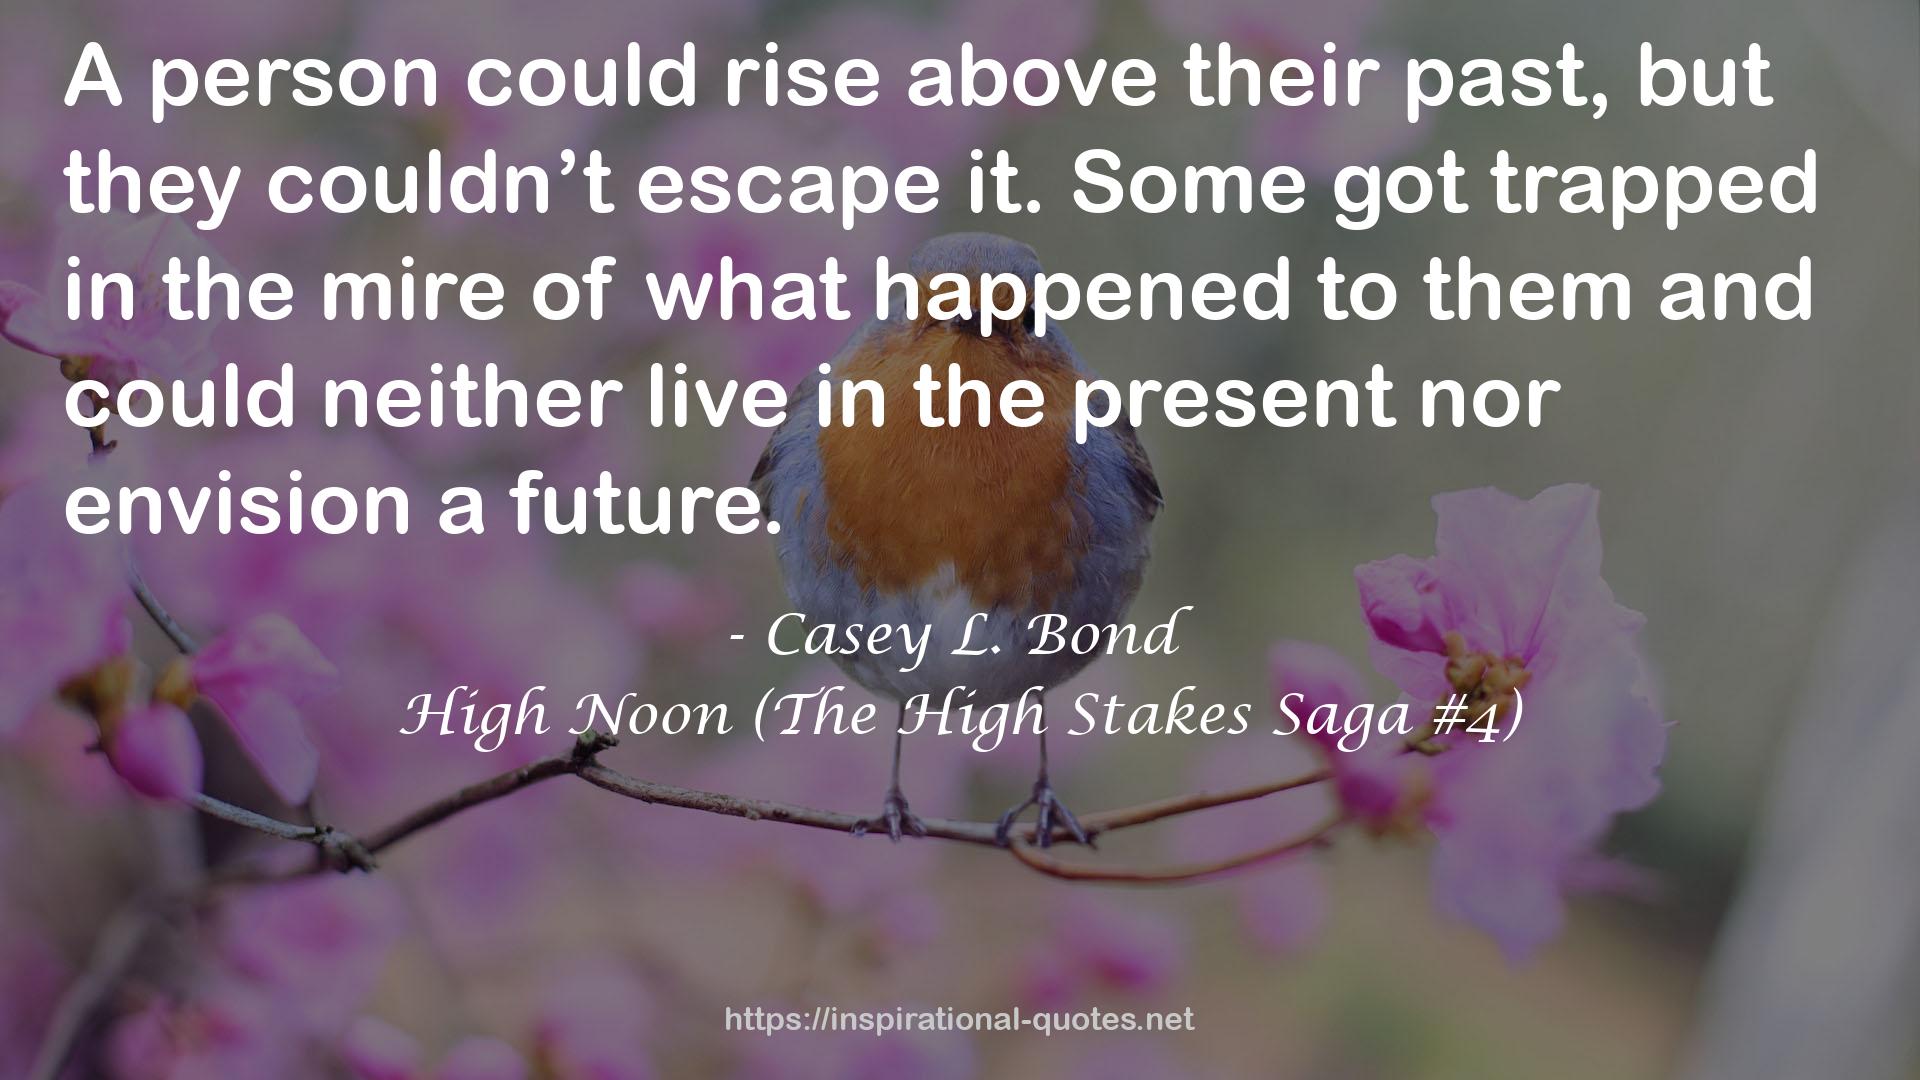 High Noon (The High Stakes Saga #4) QUOTES